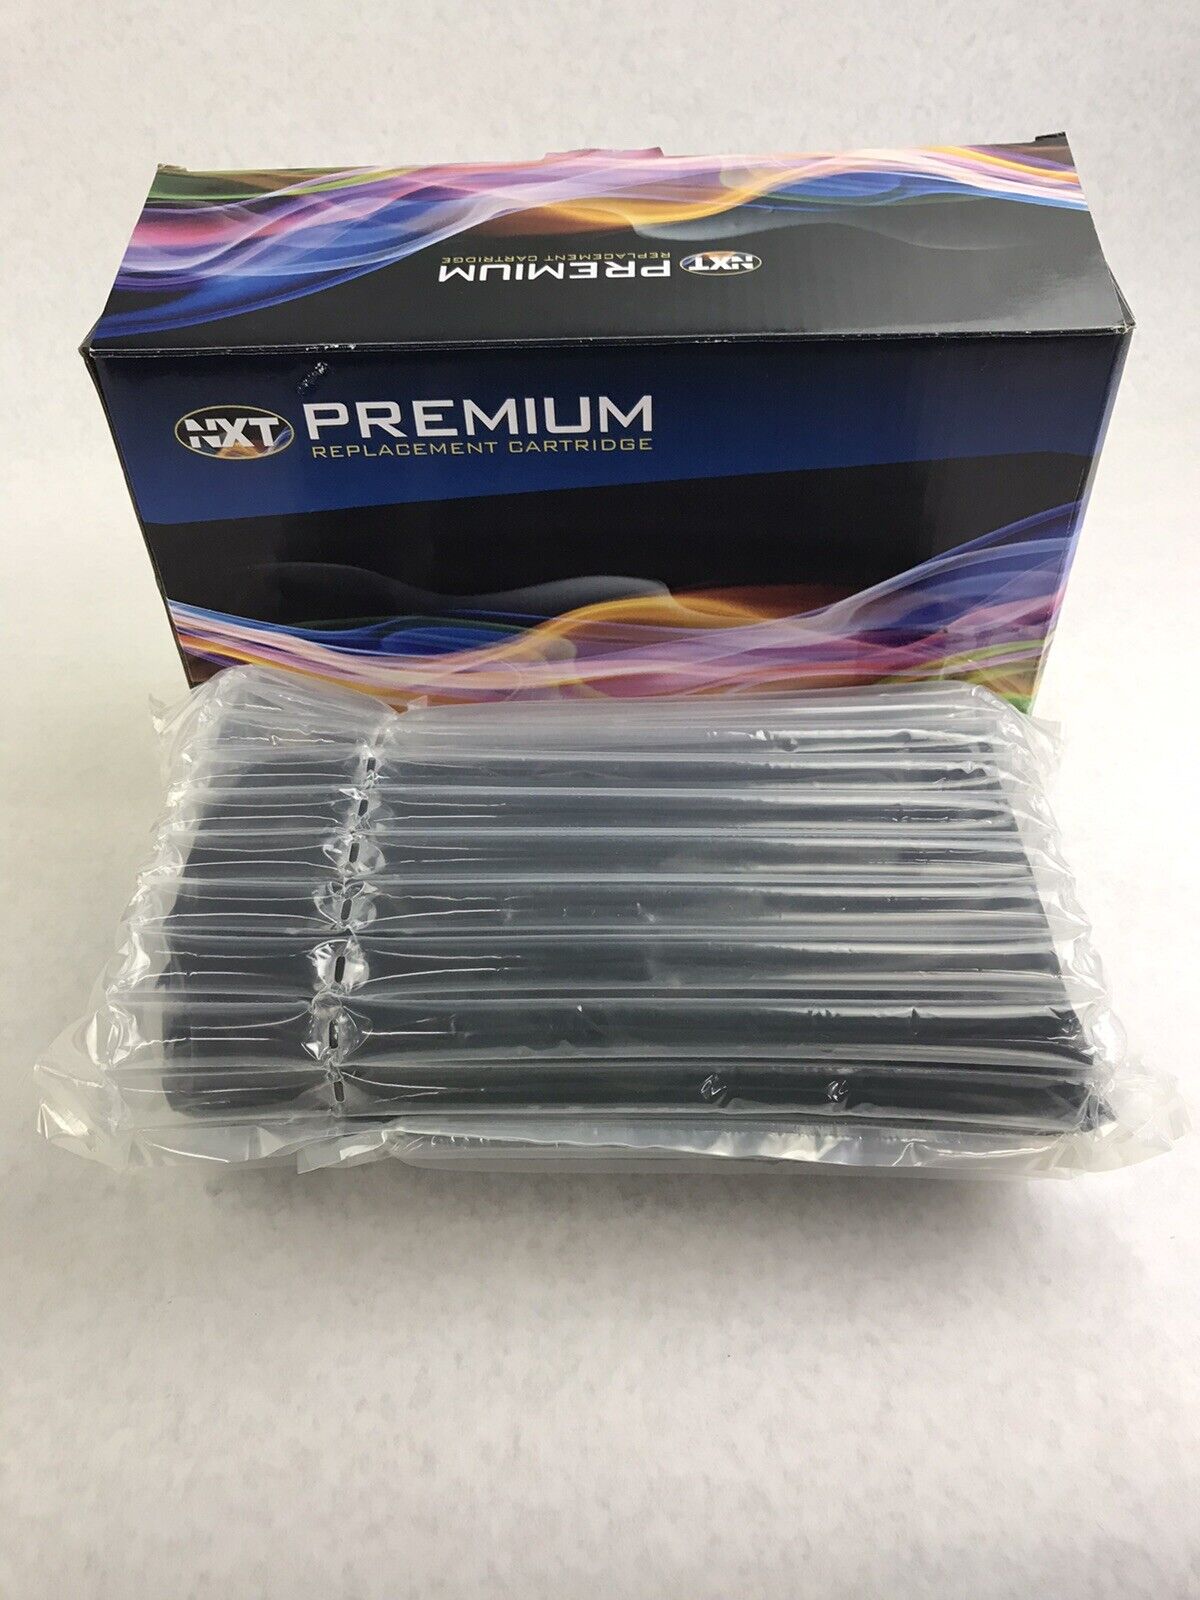 NXT Premium Replacement Cartridge HEWCE252A Yellow + Manual Expired August 2016